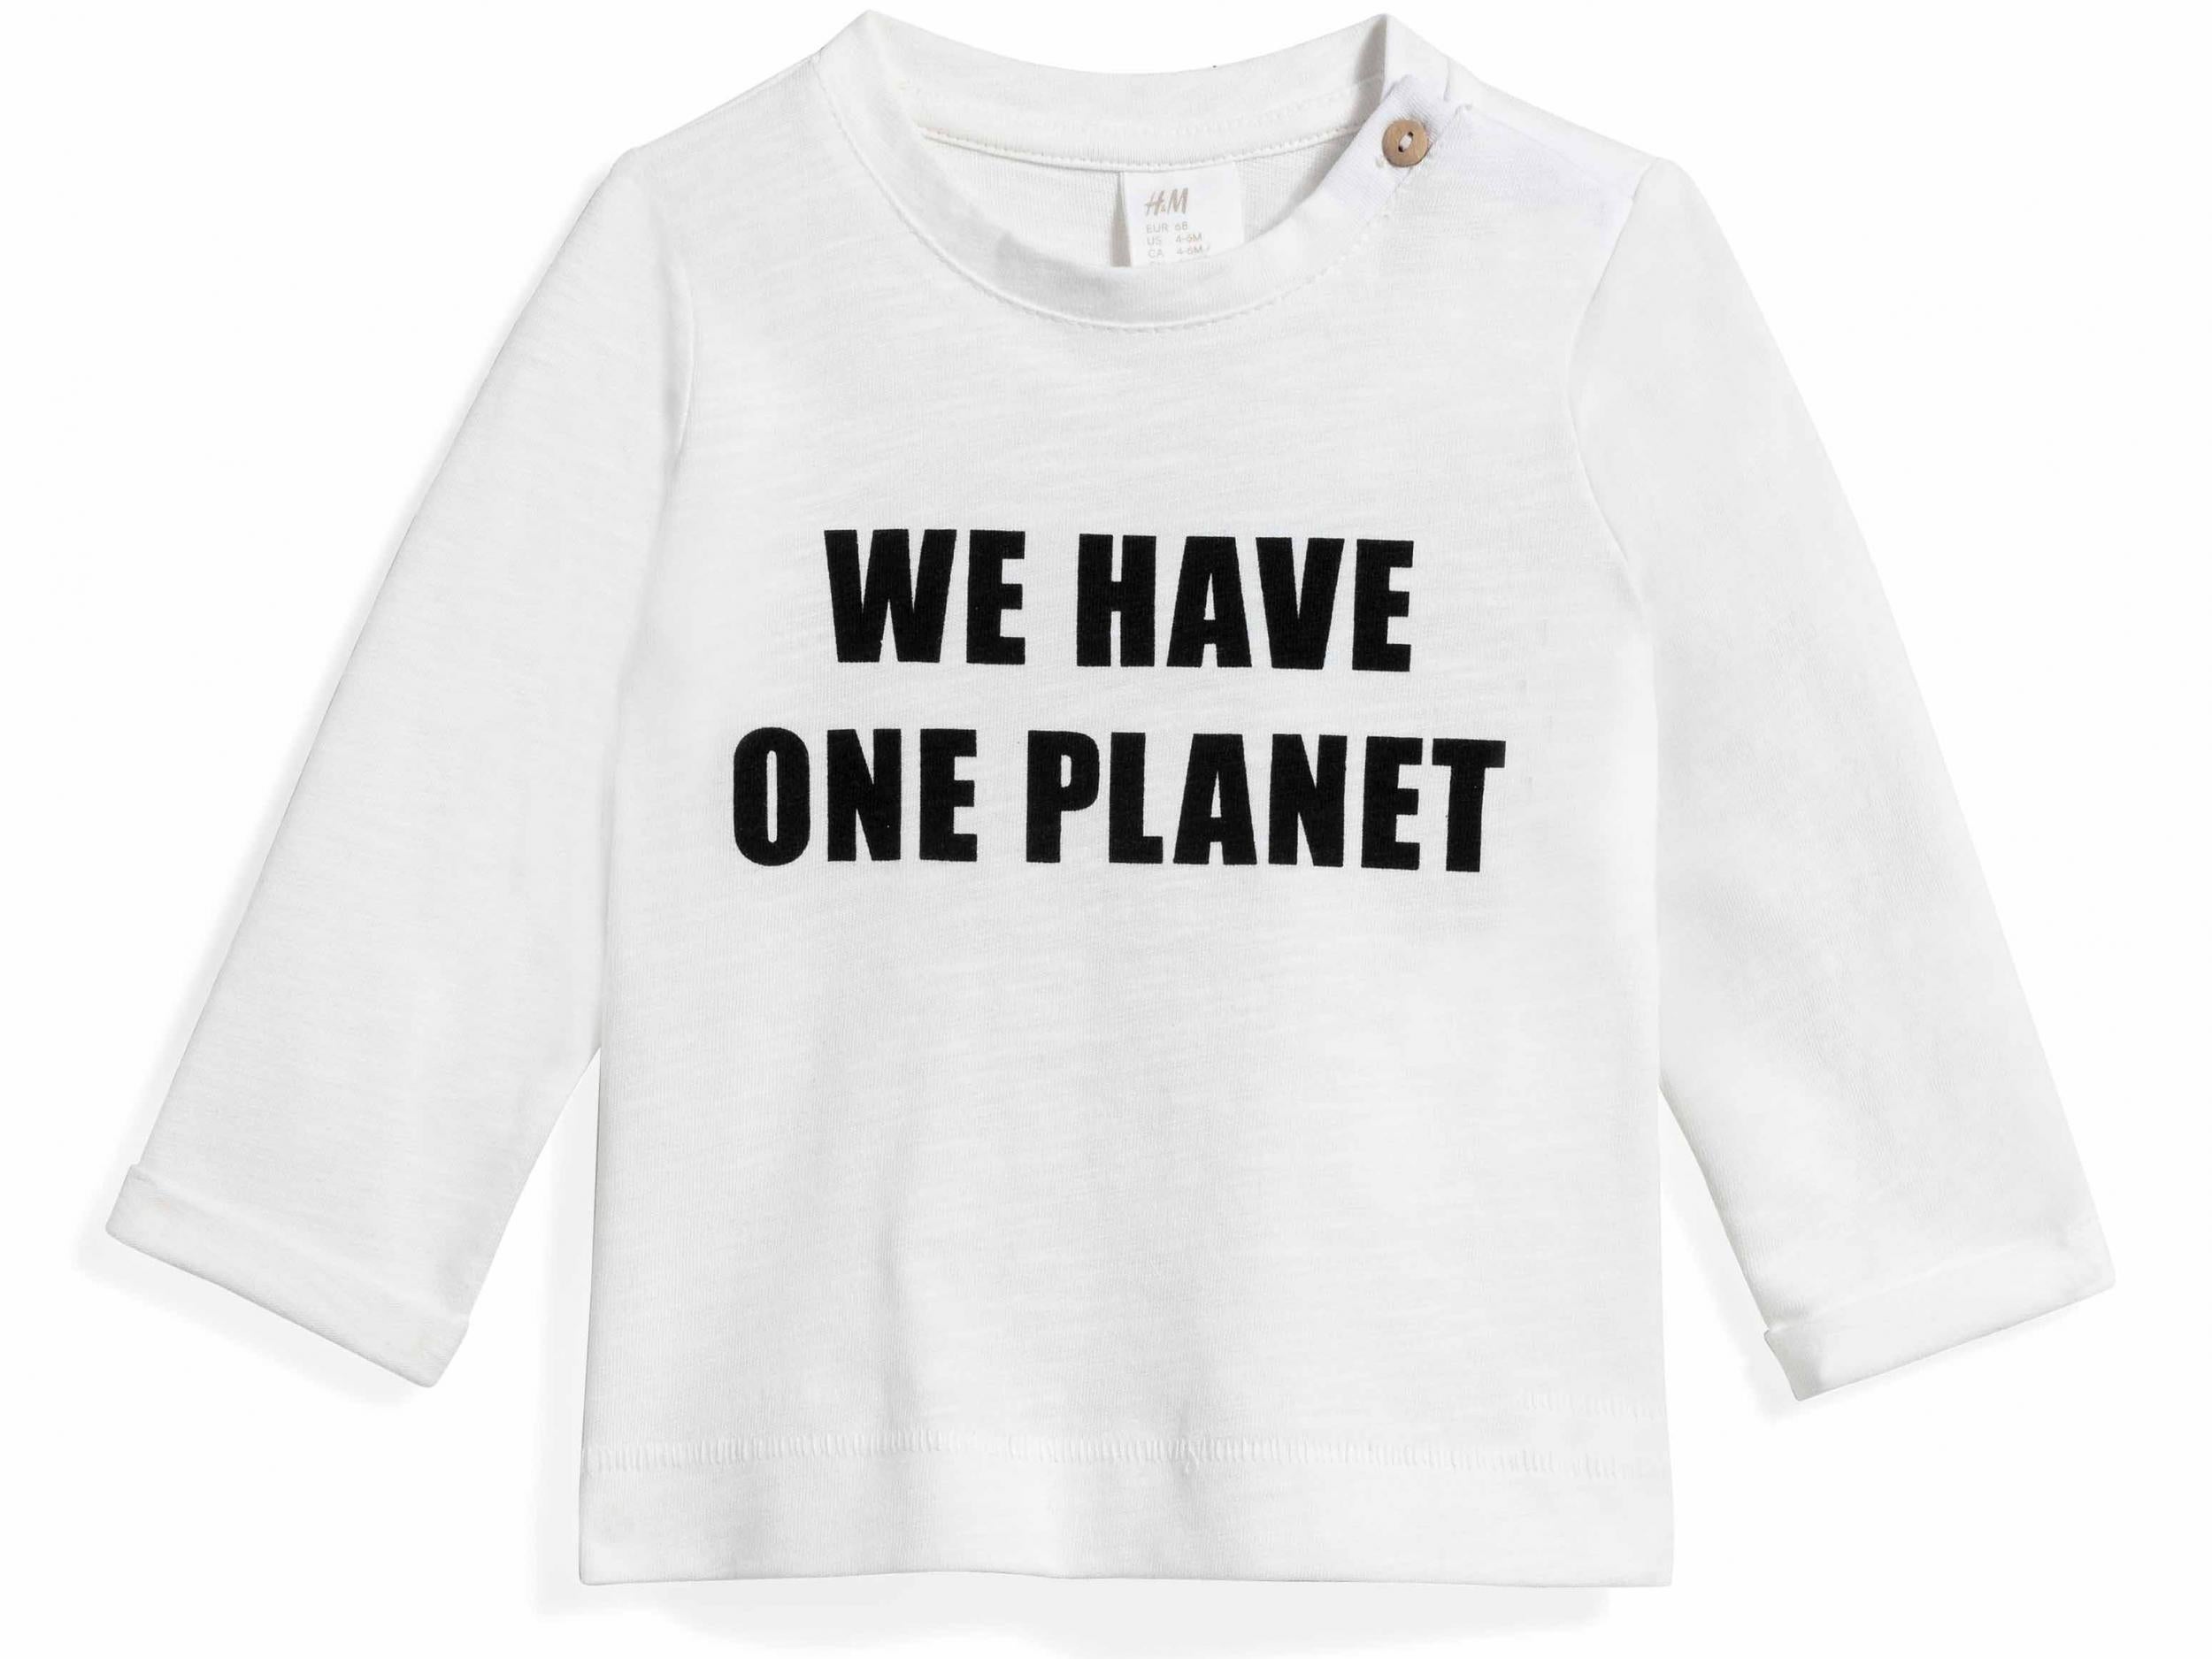 H&M launches kids t-shirt collection to support UNICEF - Fashion